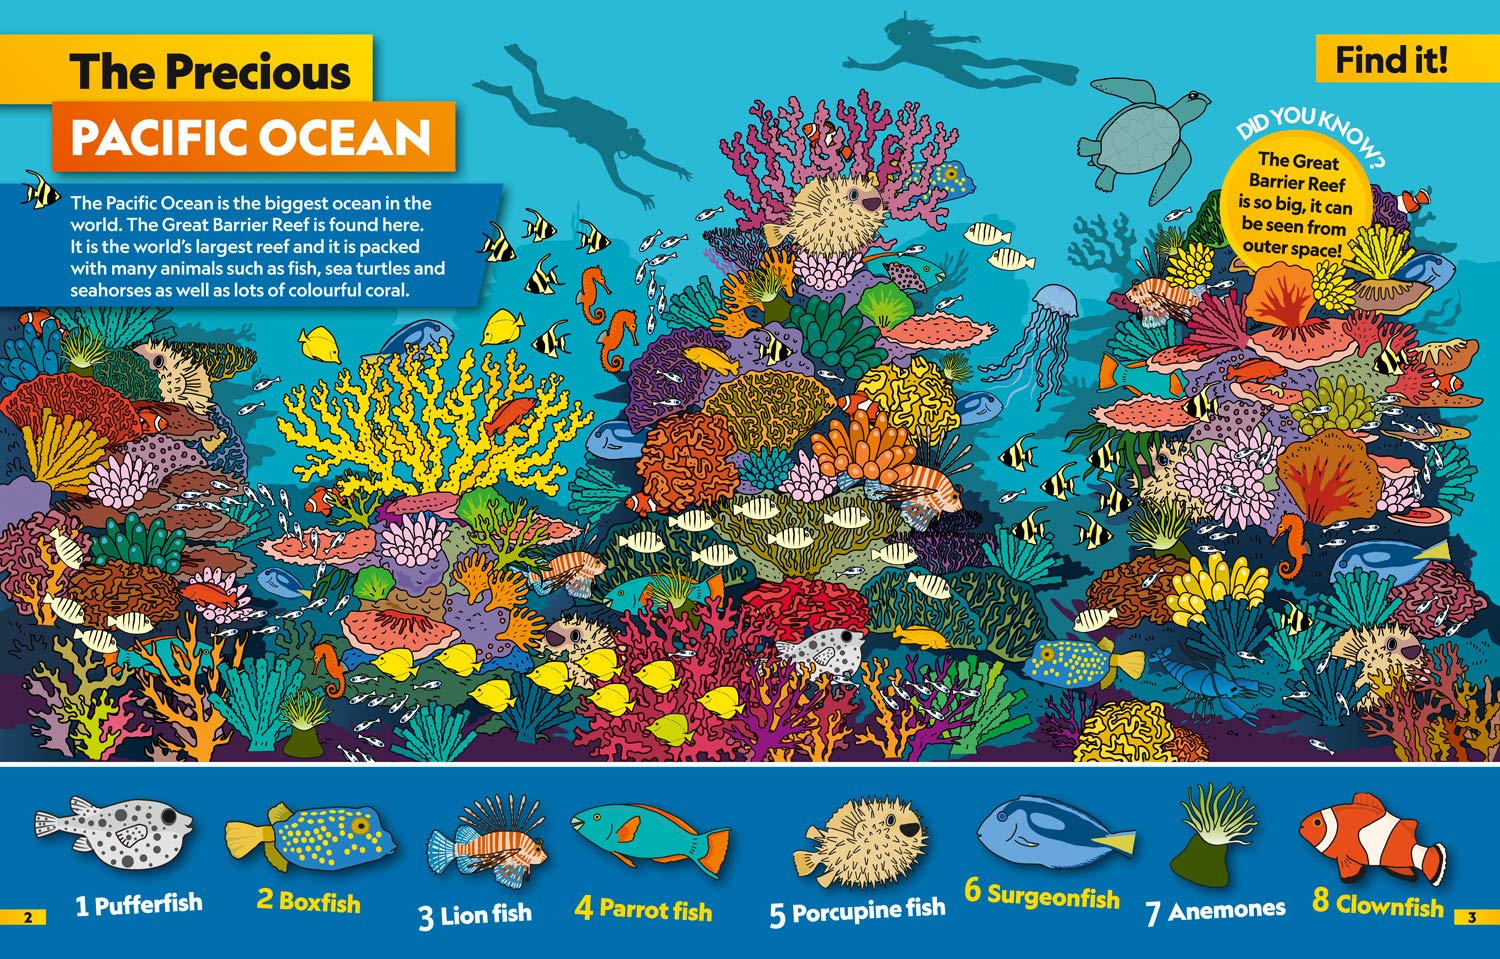 Oceans Find it! Explore it!: More than 250 things to find, facts and photos! (National Geographic Kids) - The English Bookshop Kuwait